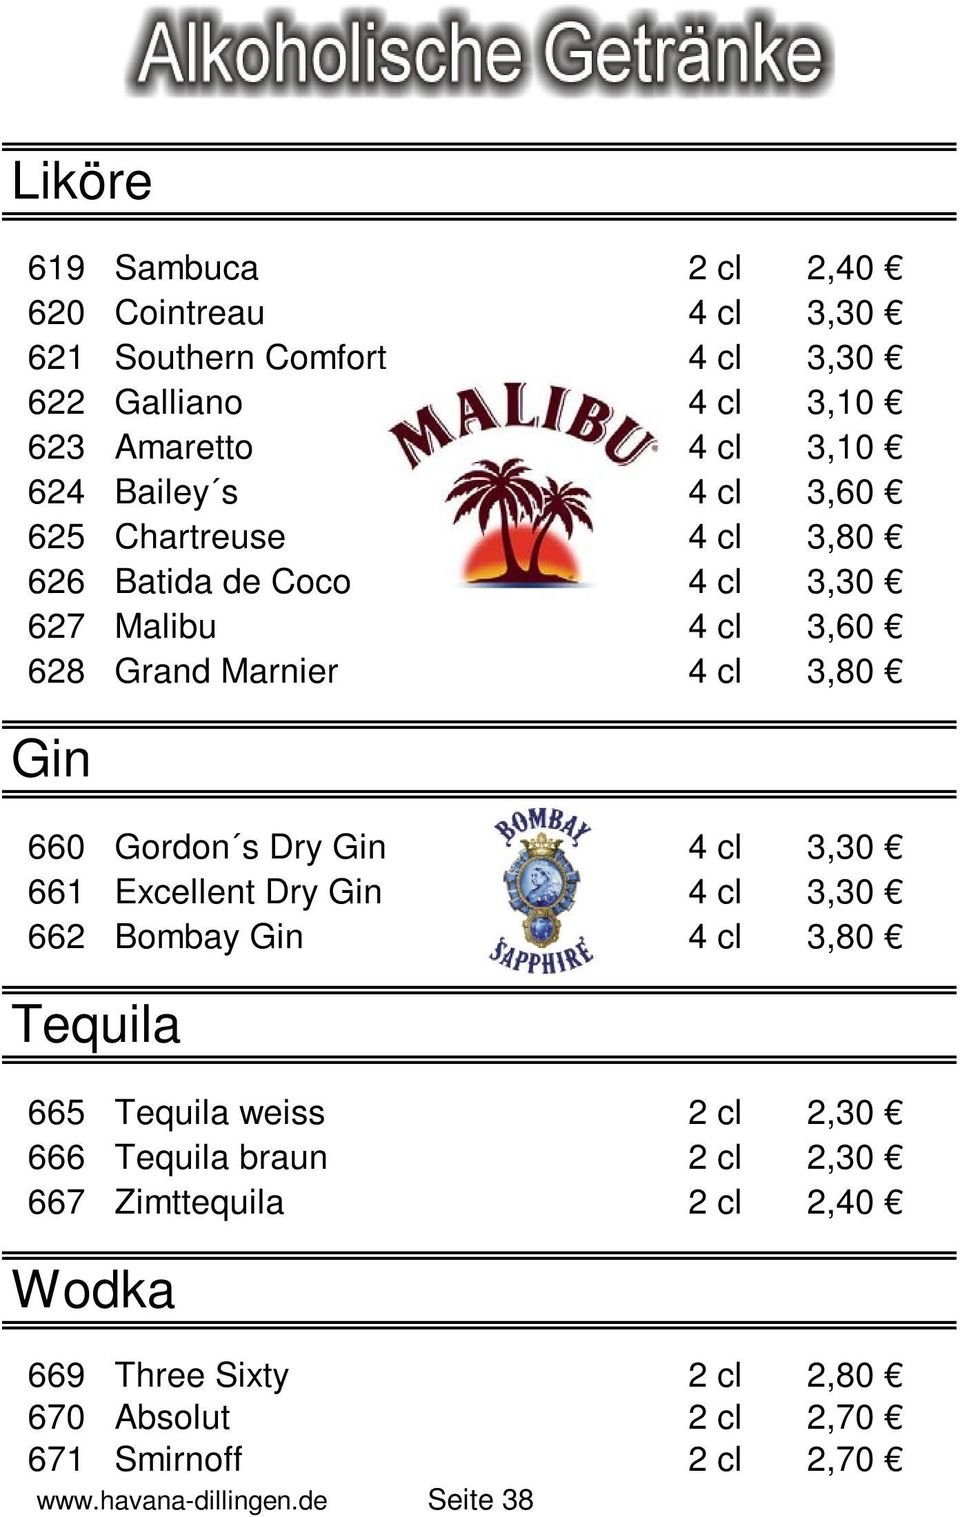 s Dry Gin 4 cl 3,30 661 Excellent Dry Gin 4 cl 3,30 662 Bombay Gin 4 cl 3,80 Tequila 665 Tequila weiss 2 cl 2,30 666 Tequila braun 2 cl